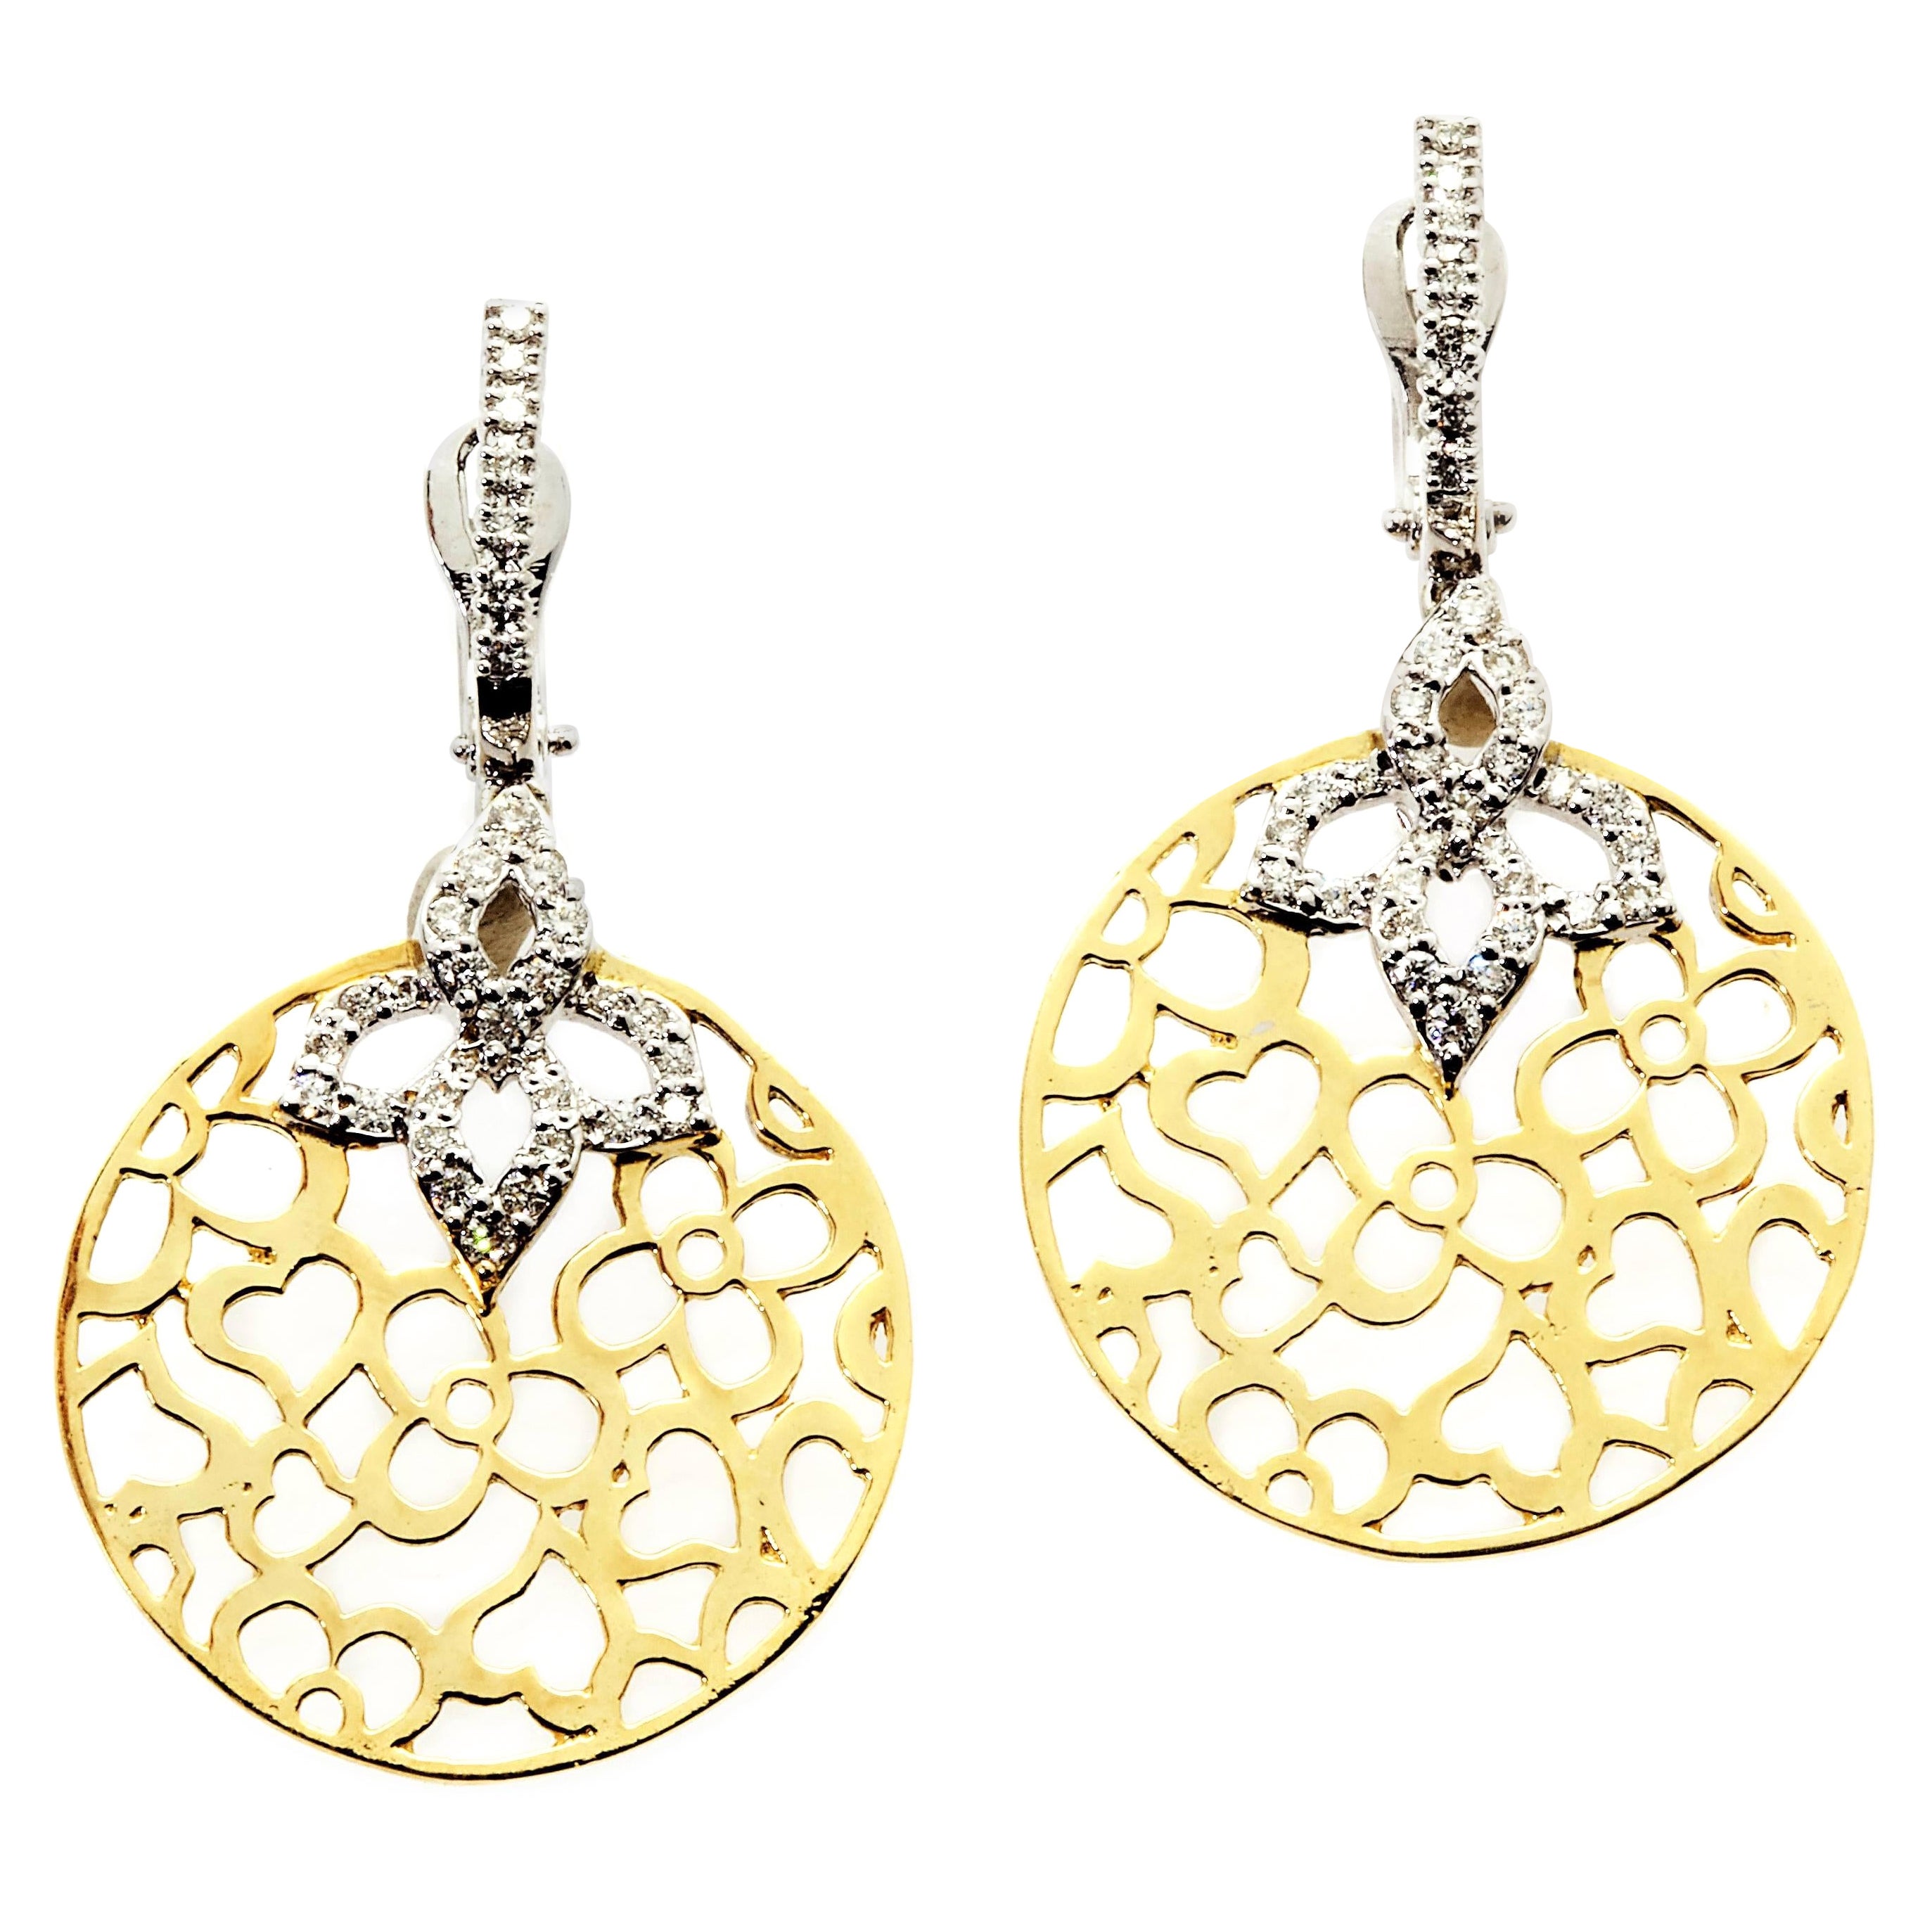 Stambolian 18k Yellow White Two-Tone Gold and Diamond Floral Drop Earrings